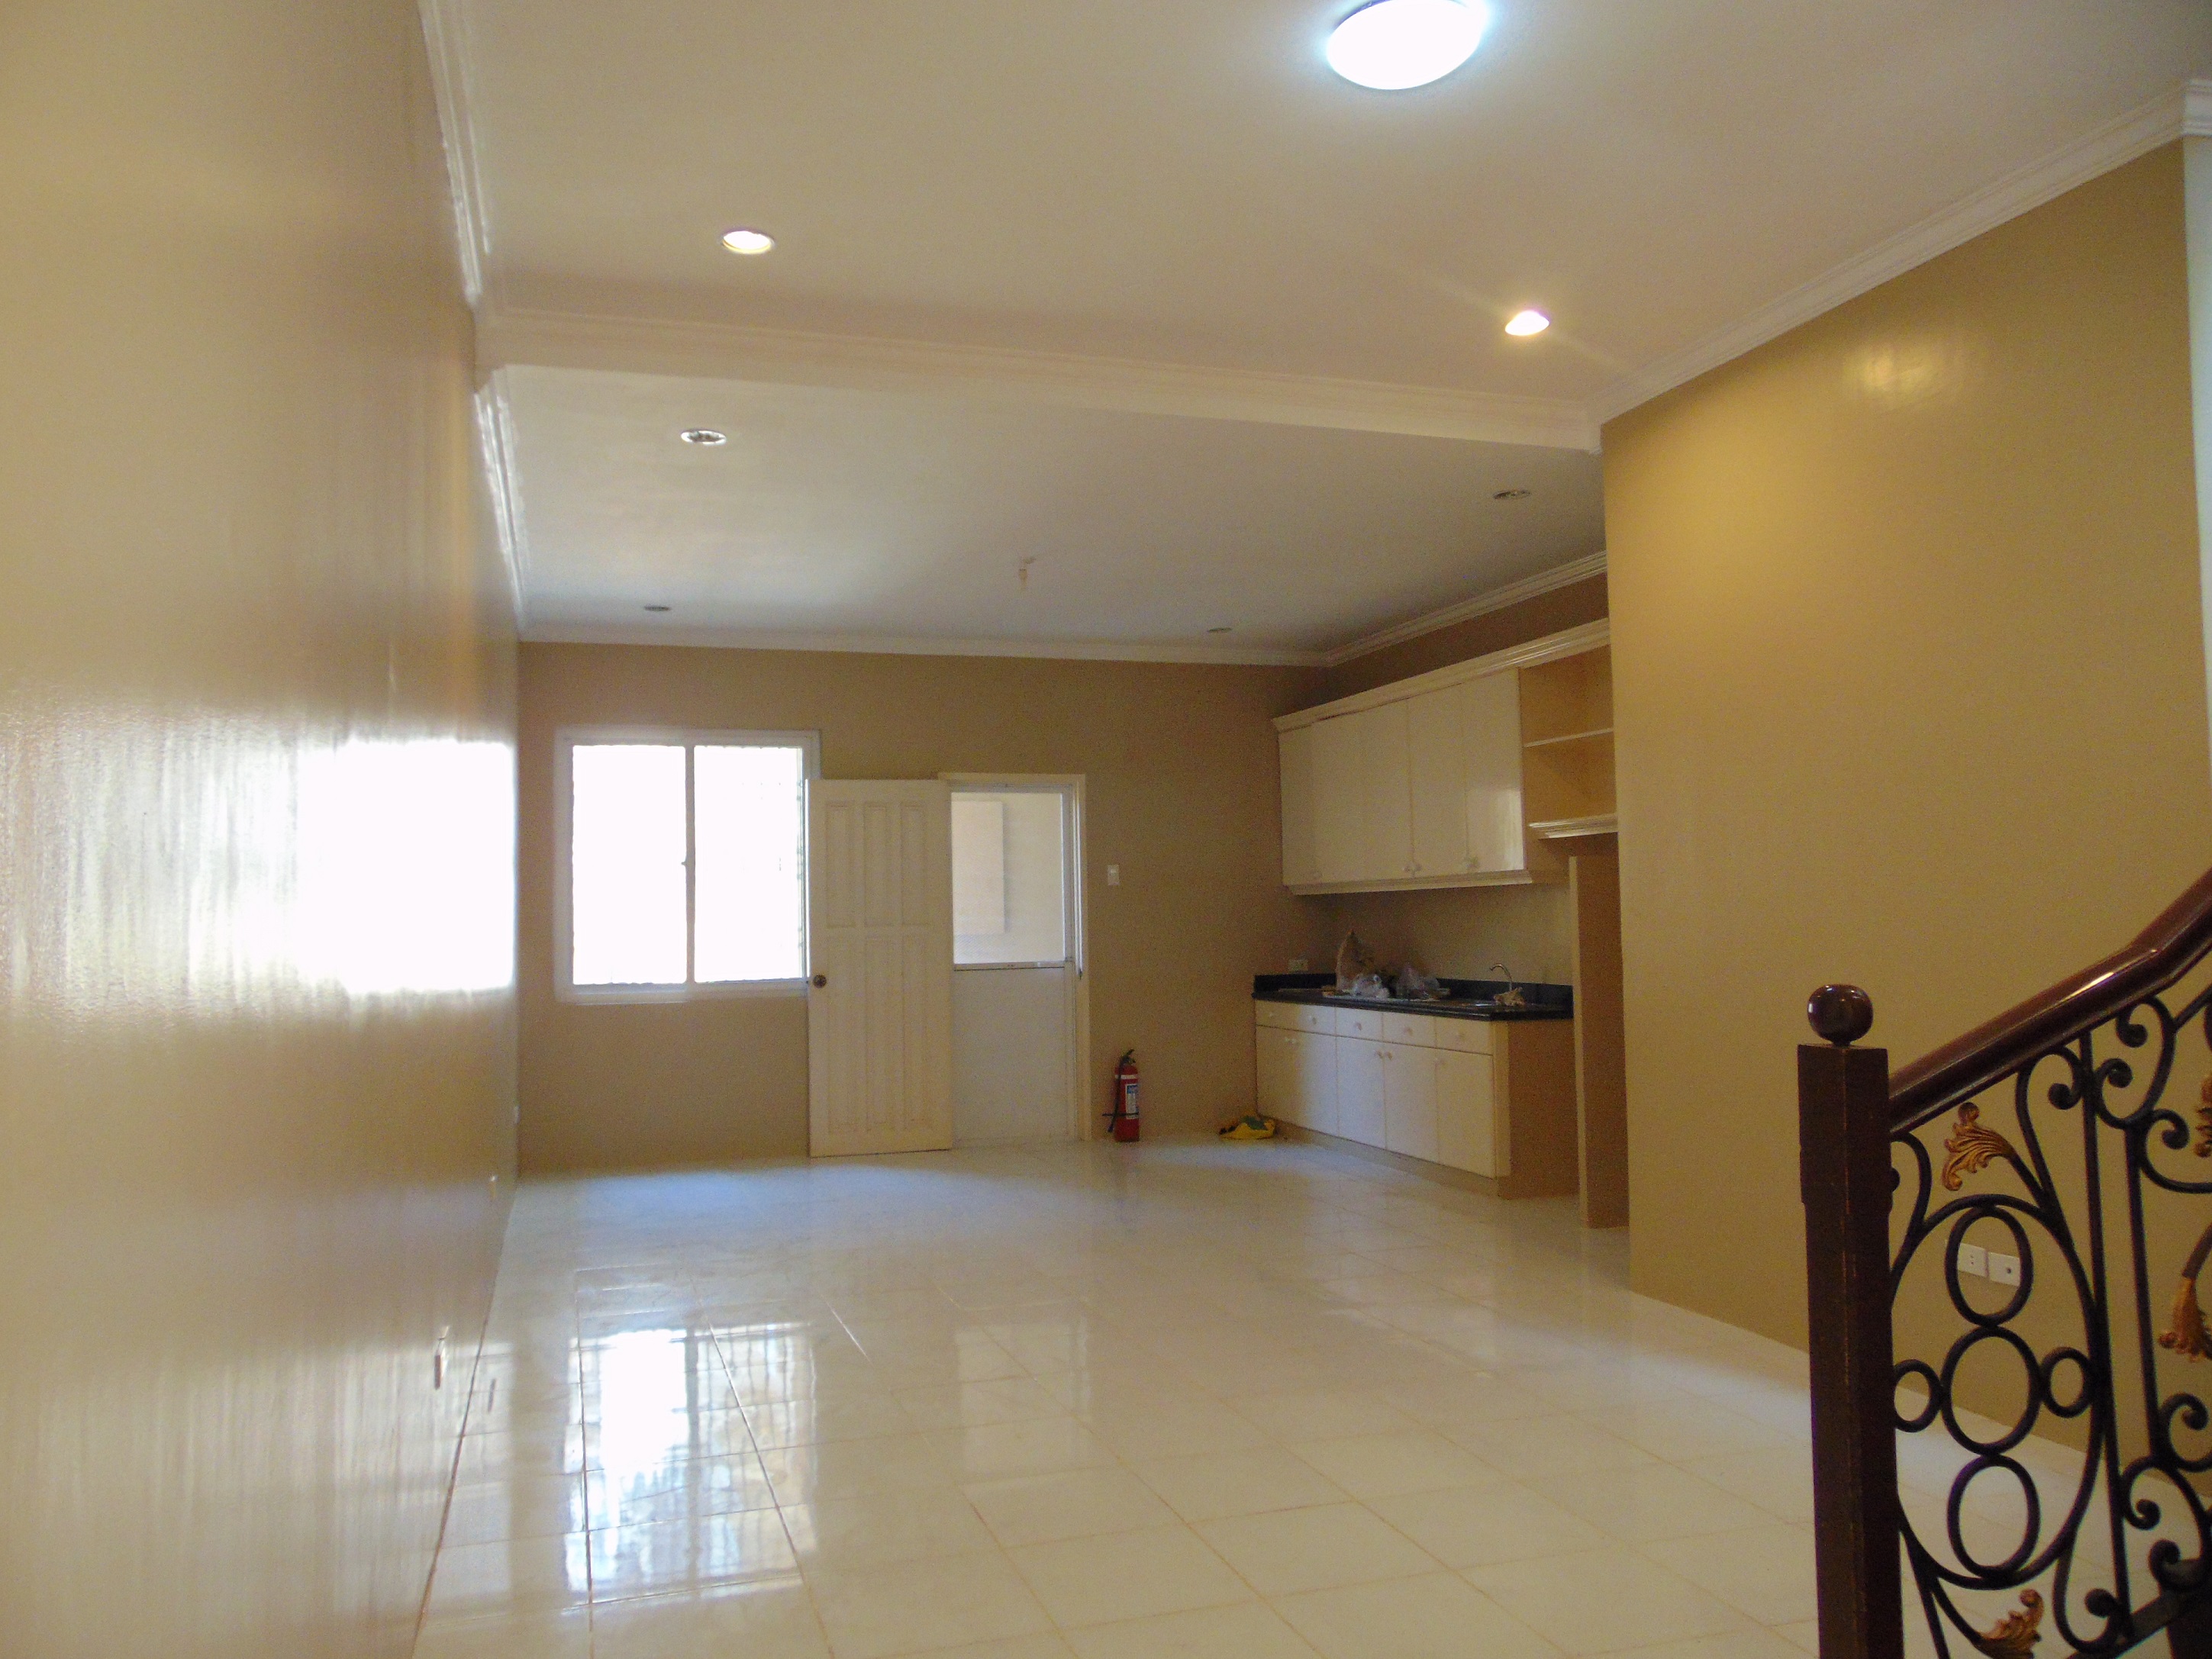 3-bedrooms-townhouse-located-in-mabolo-cebu-city-philippines